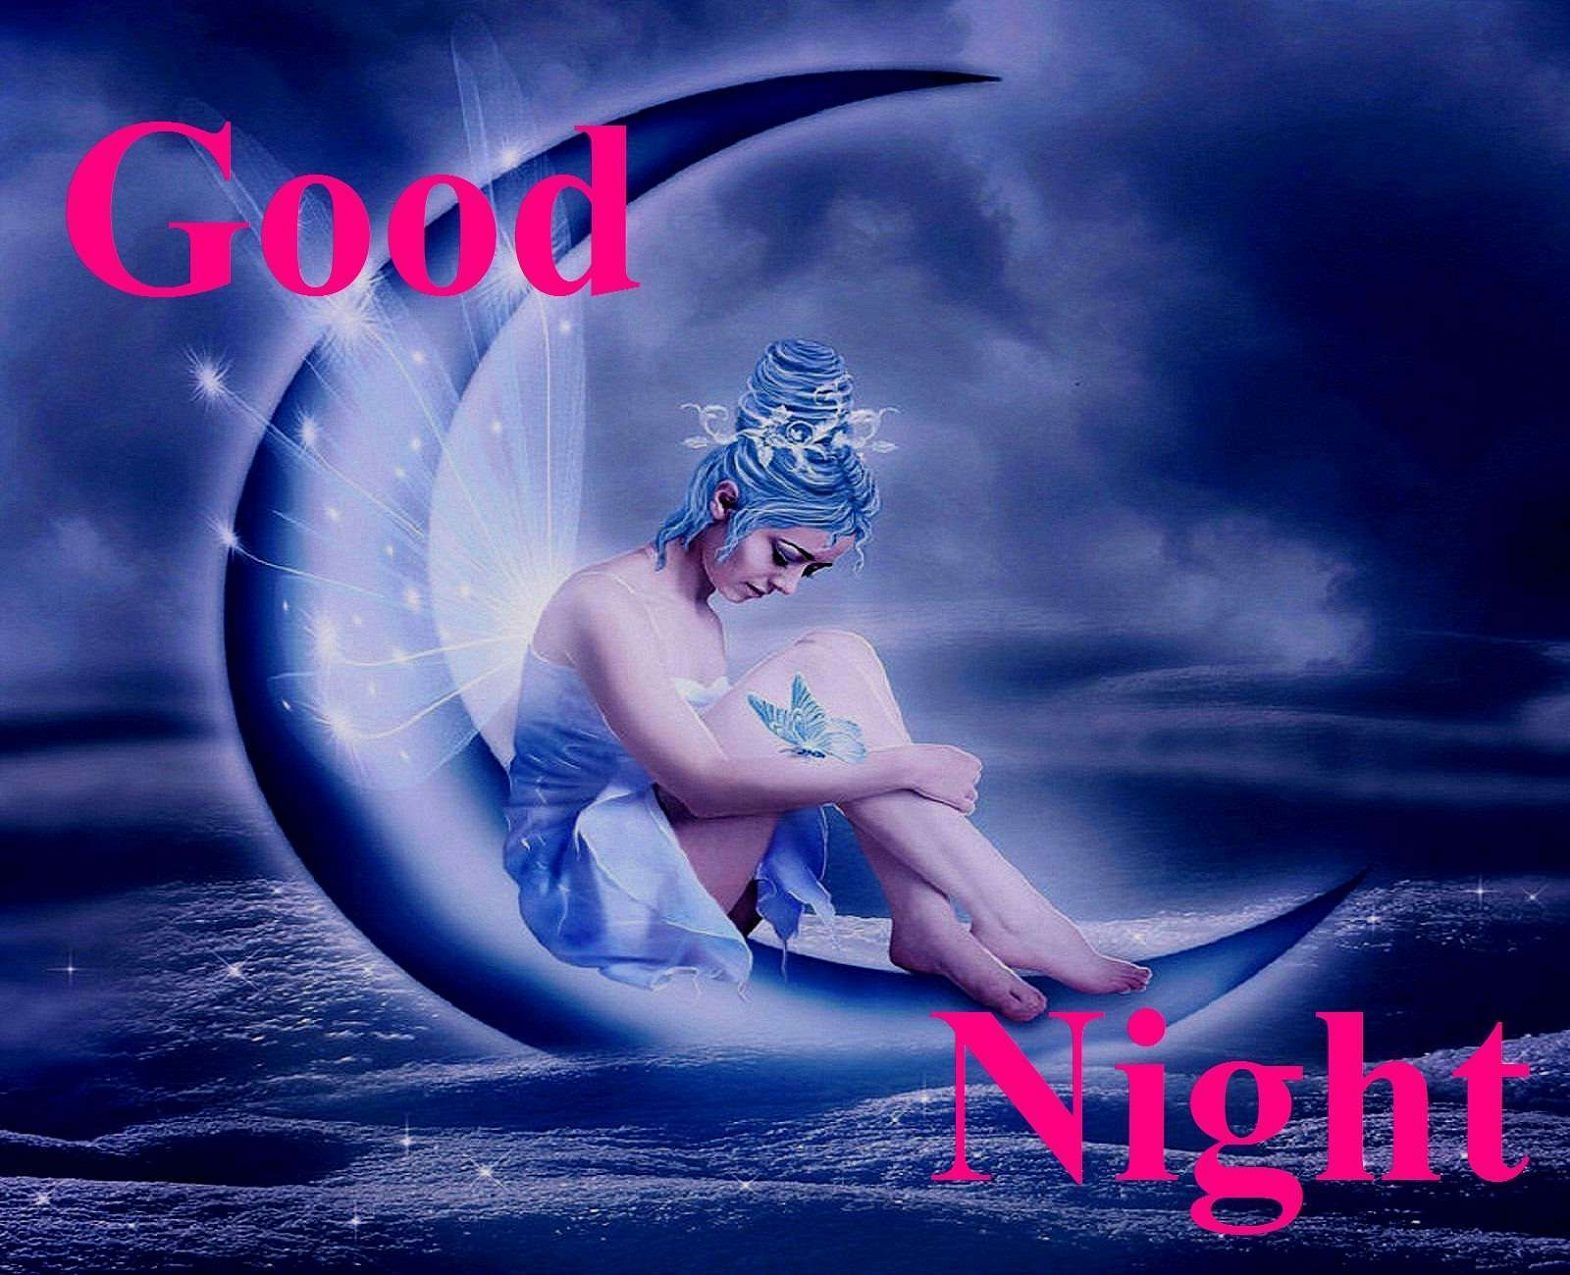 Good Night Wishes images for Facebook Share, hd, wallpapers, 1080p ...